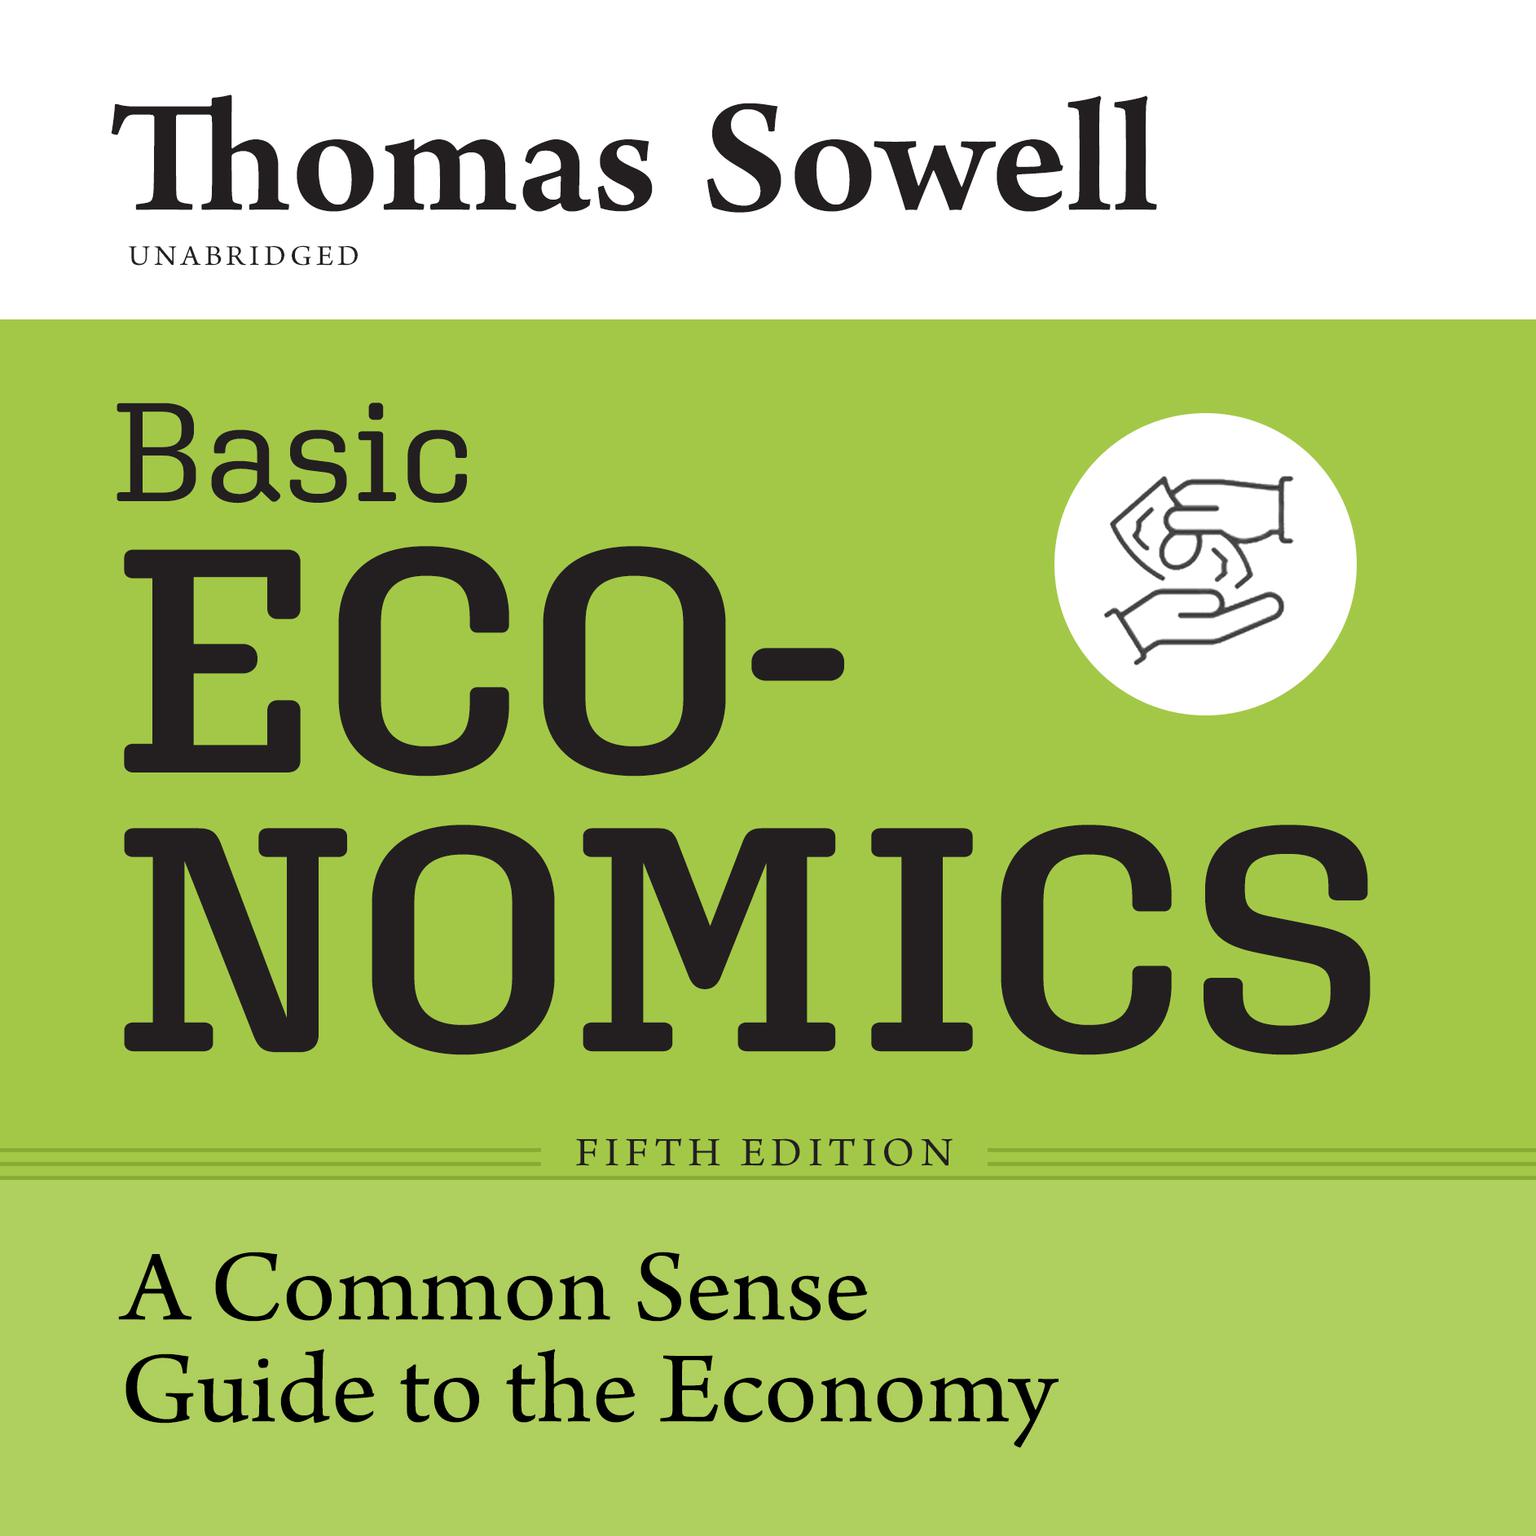 Basic Economics, Fifth Edition: A Common Sense Guide to the Economy  Audiobook, by Thomas Sowell